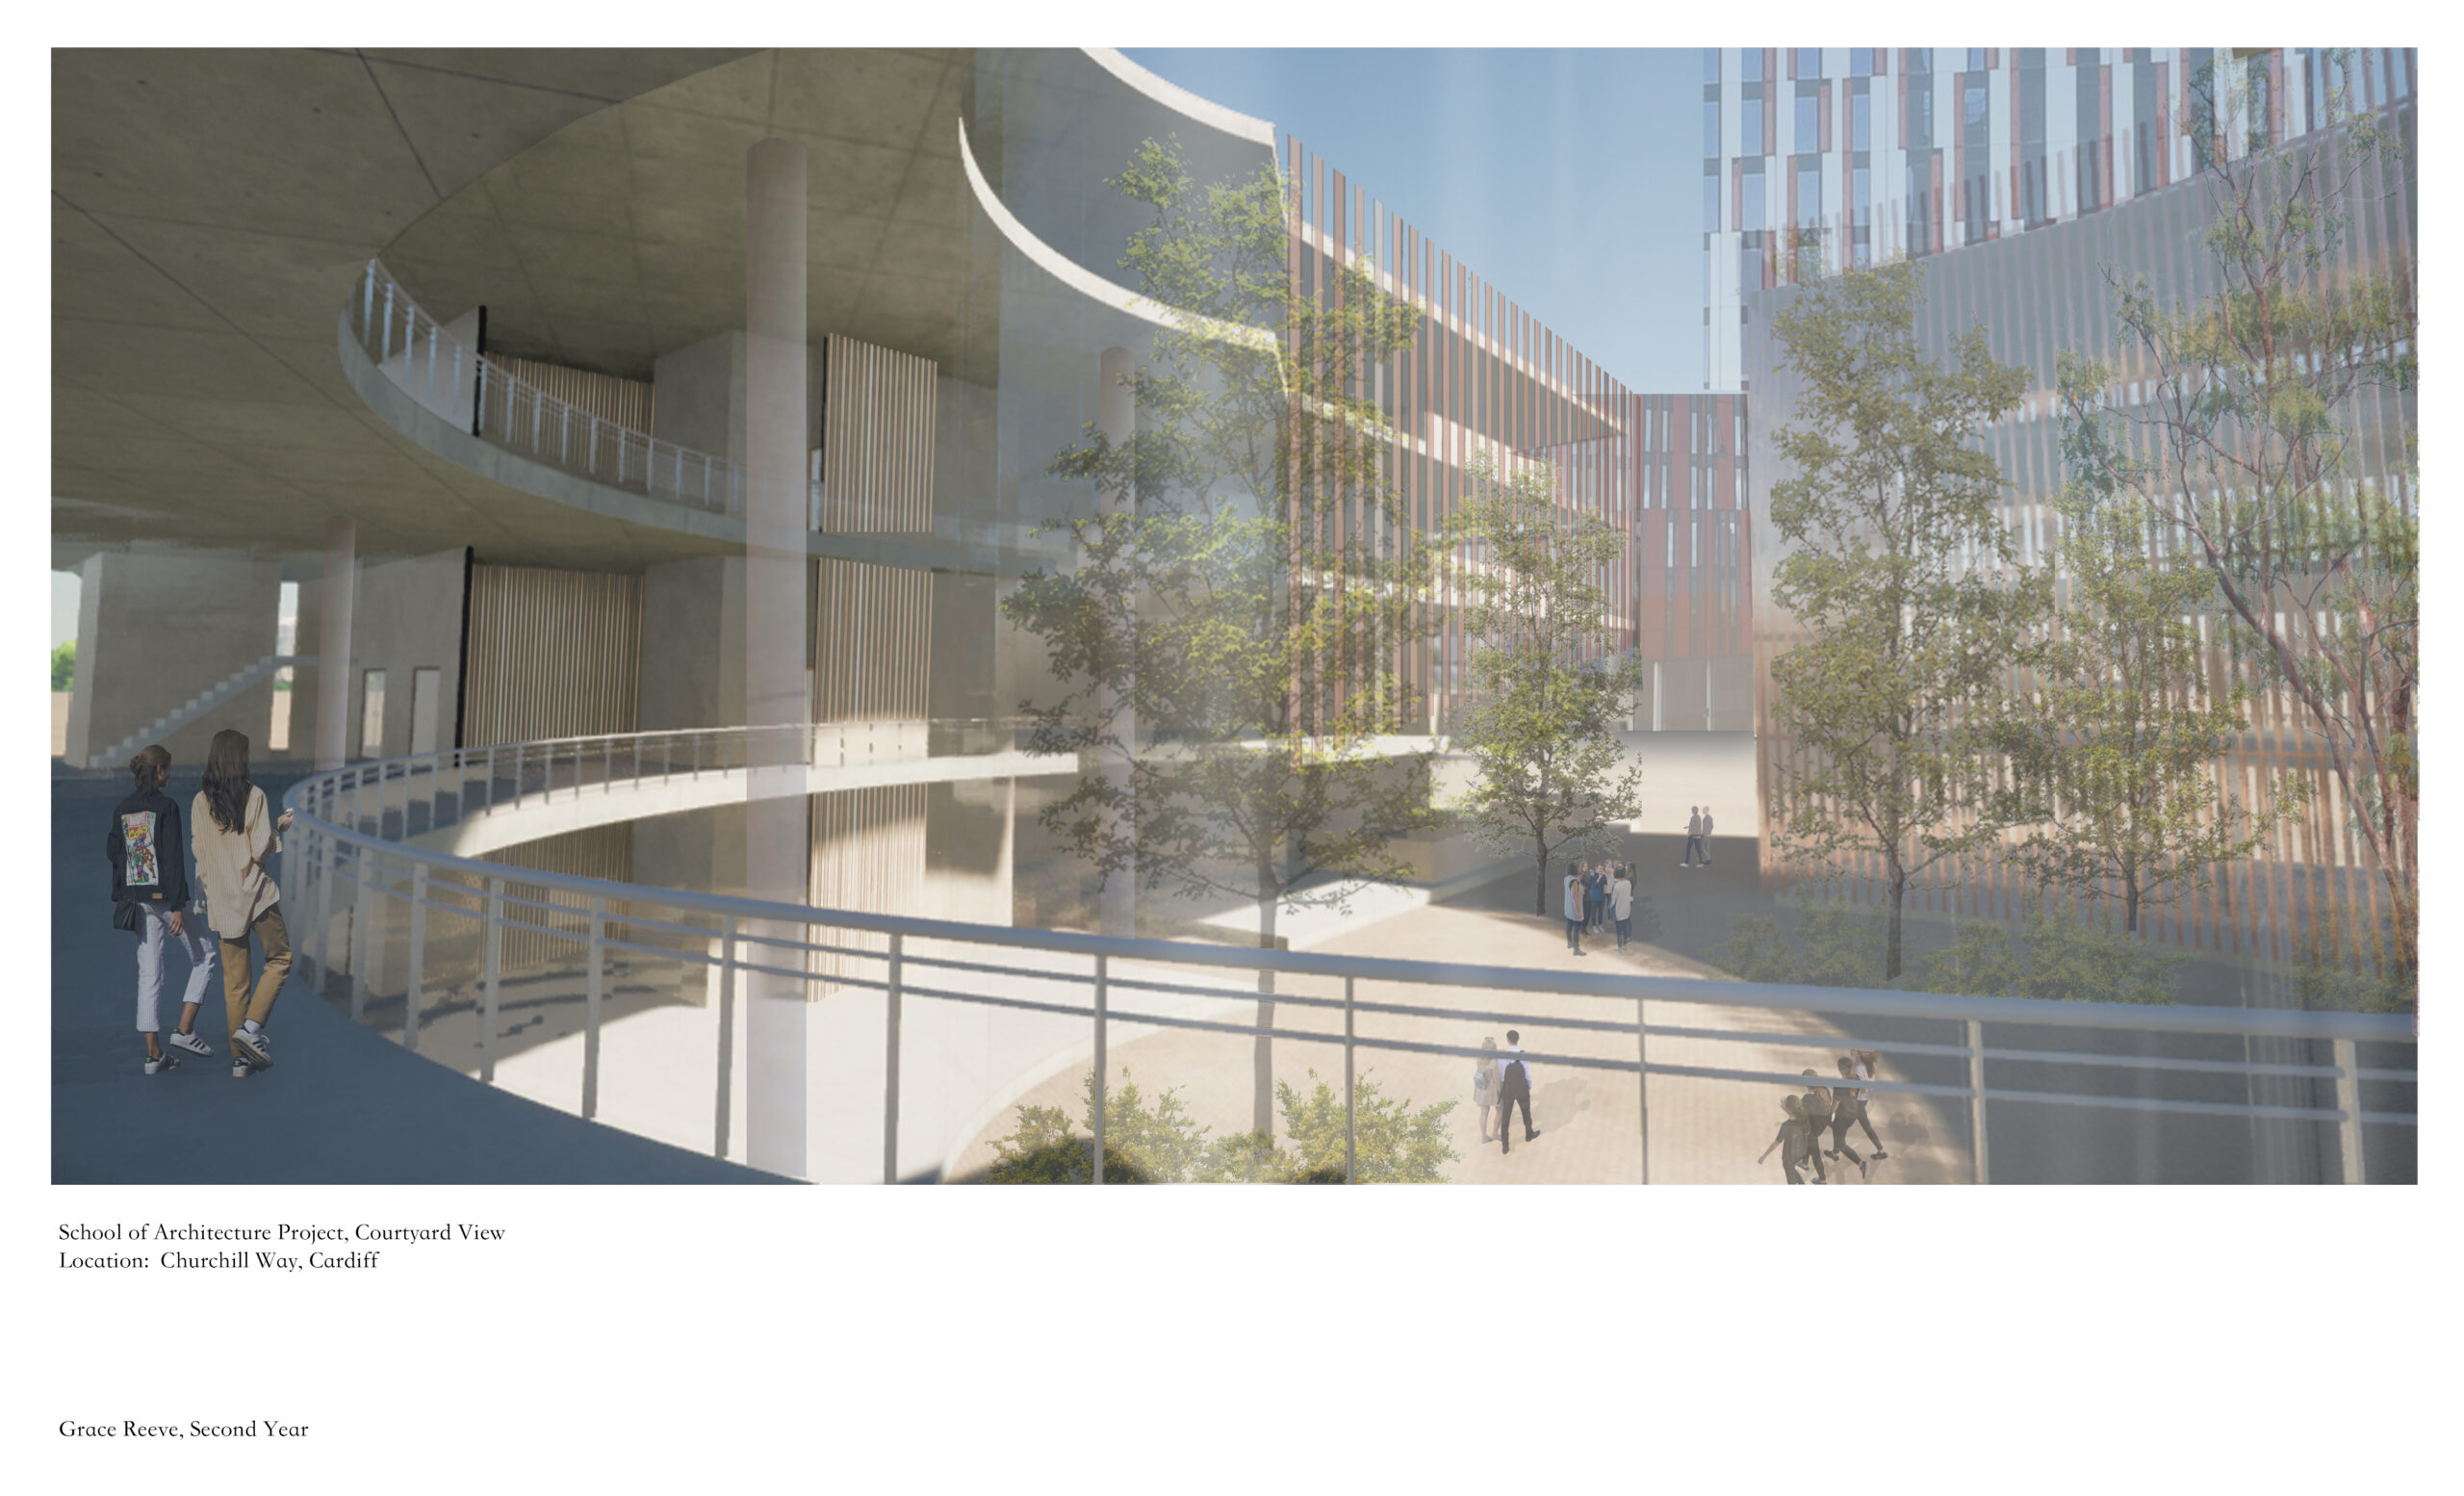 Courtyard View of the scheme proposed by Grace Reeve